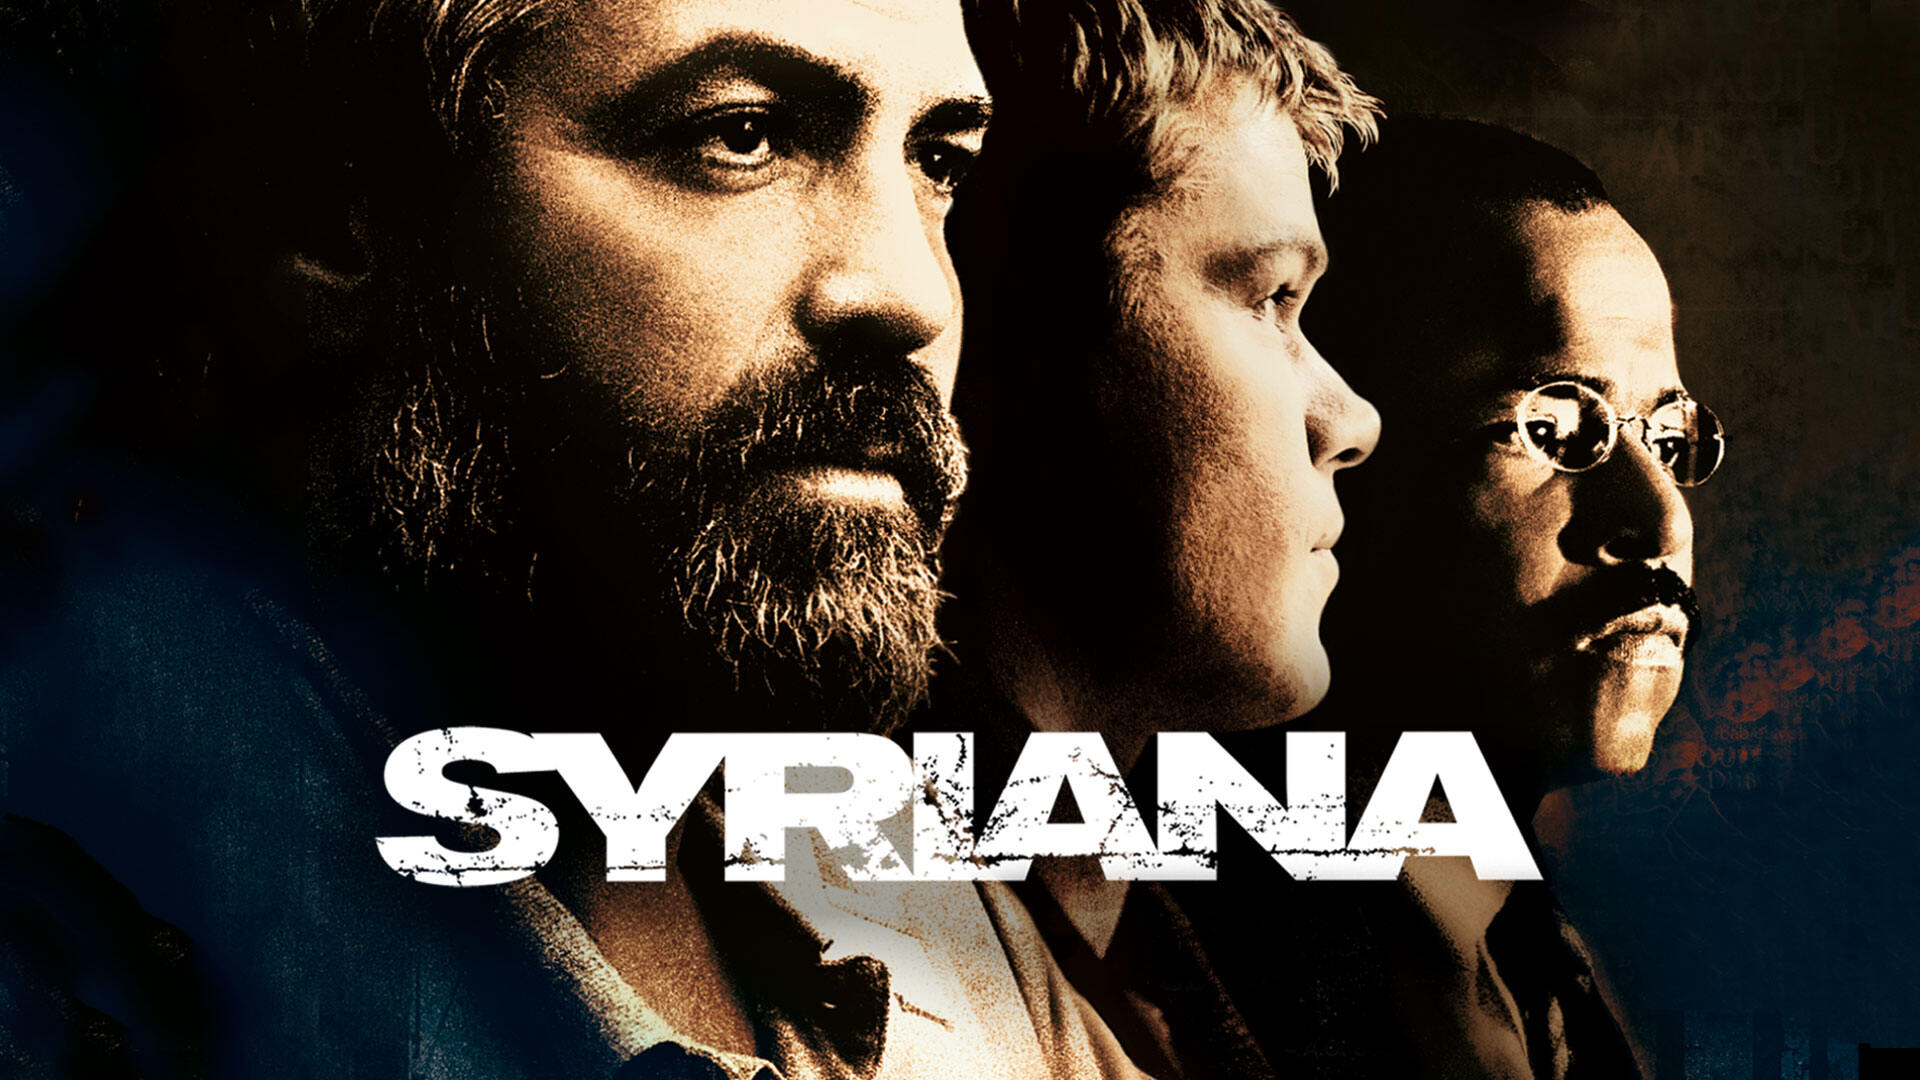 44-facts-about-the-movie-syriana